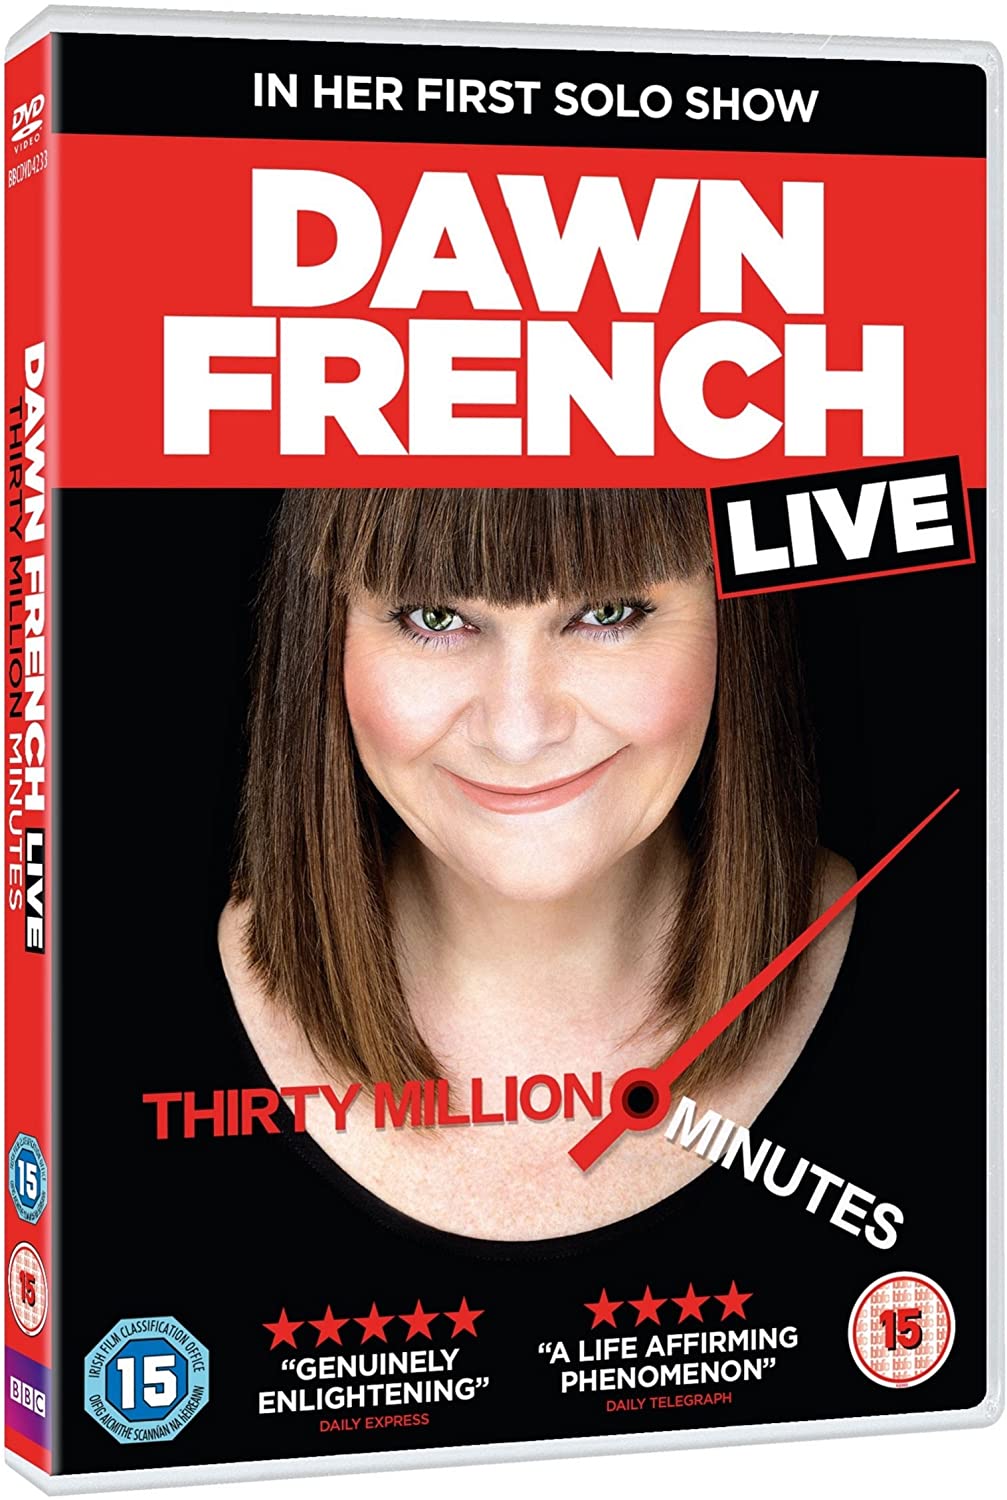 Dawn French Live: Thirty Million Minutes [2017] - Comedy [DVD]